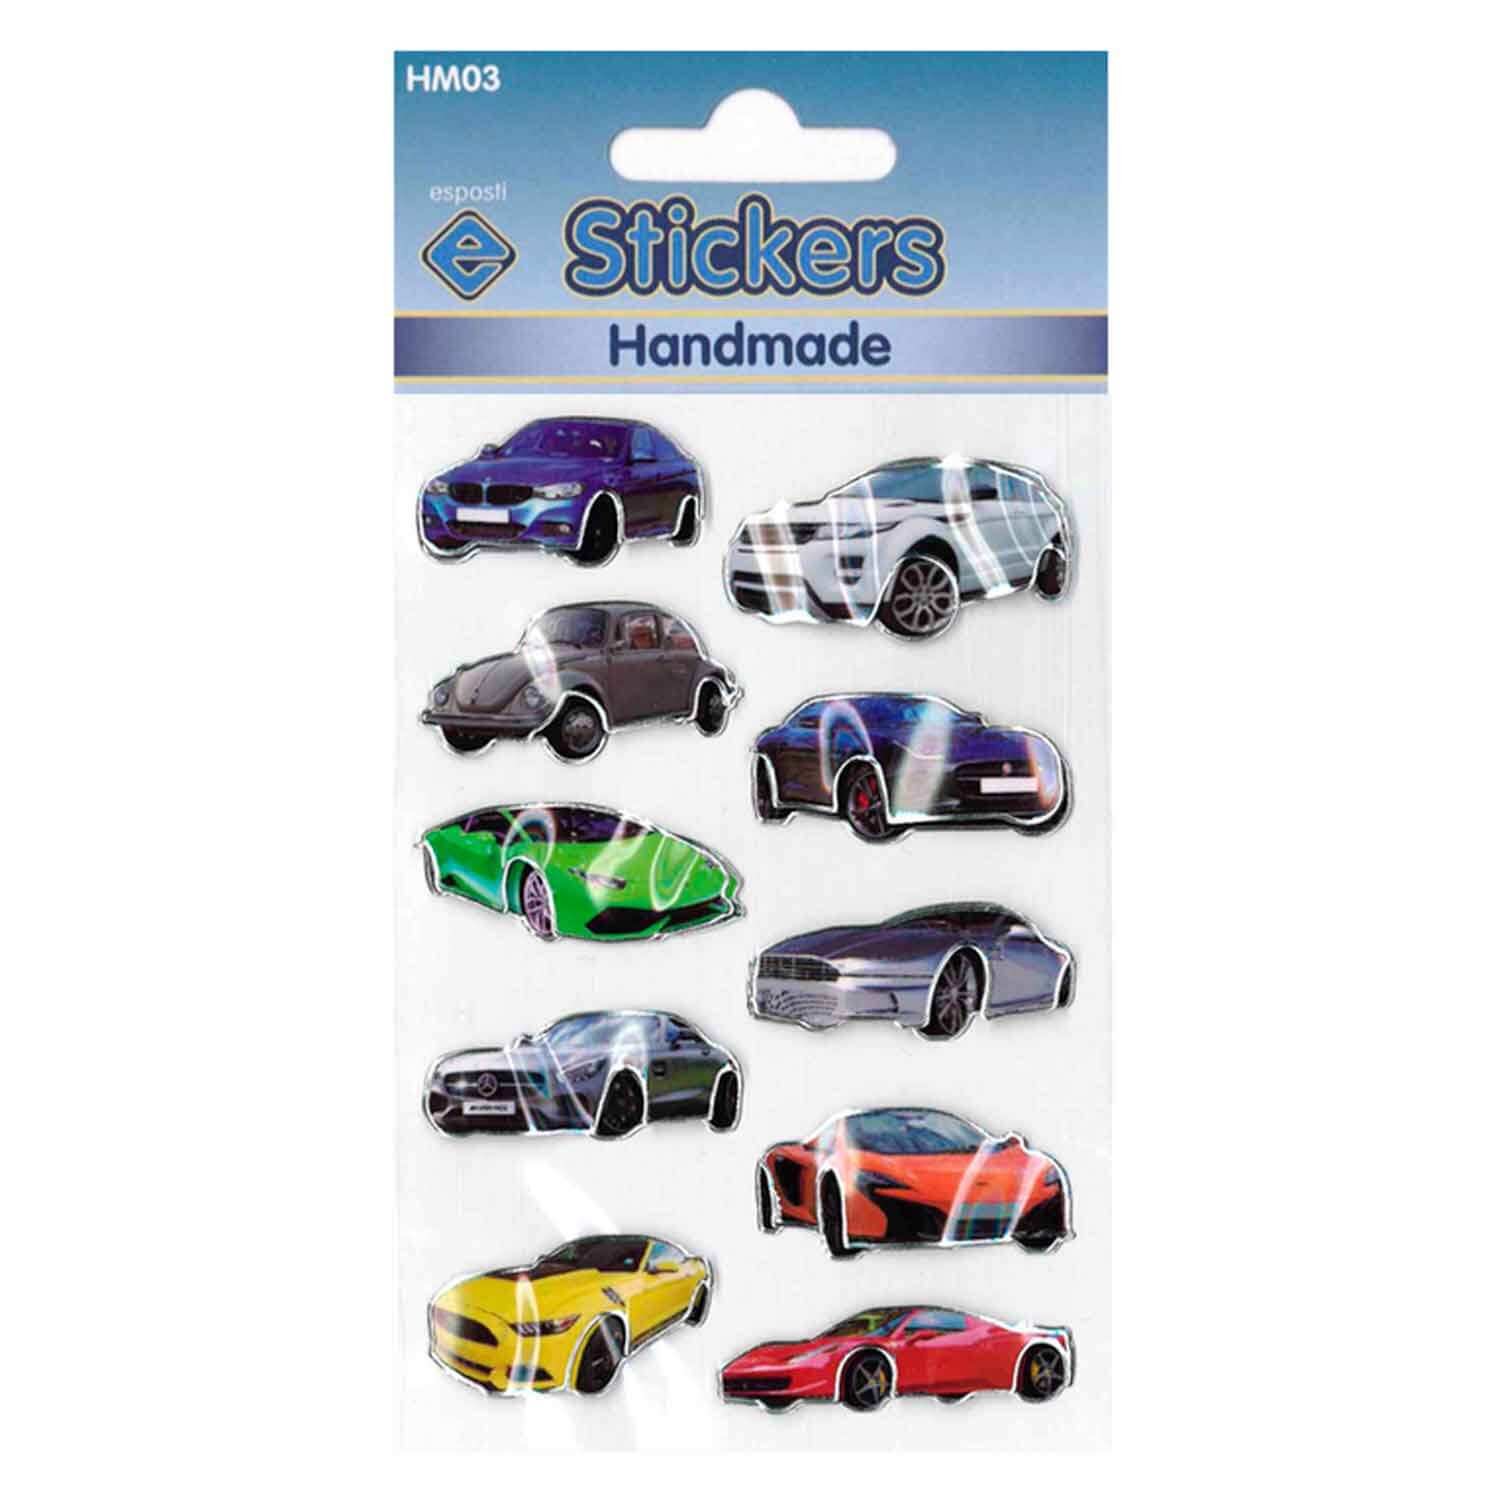 Cars Self Adhesive Handmade Novelty Stickers - Pack of 10